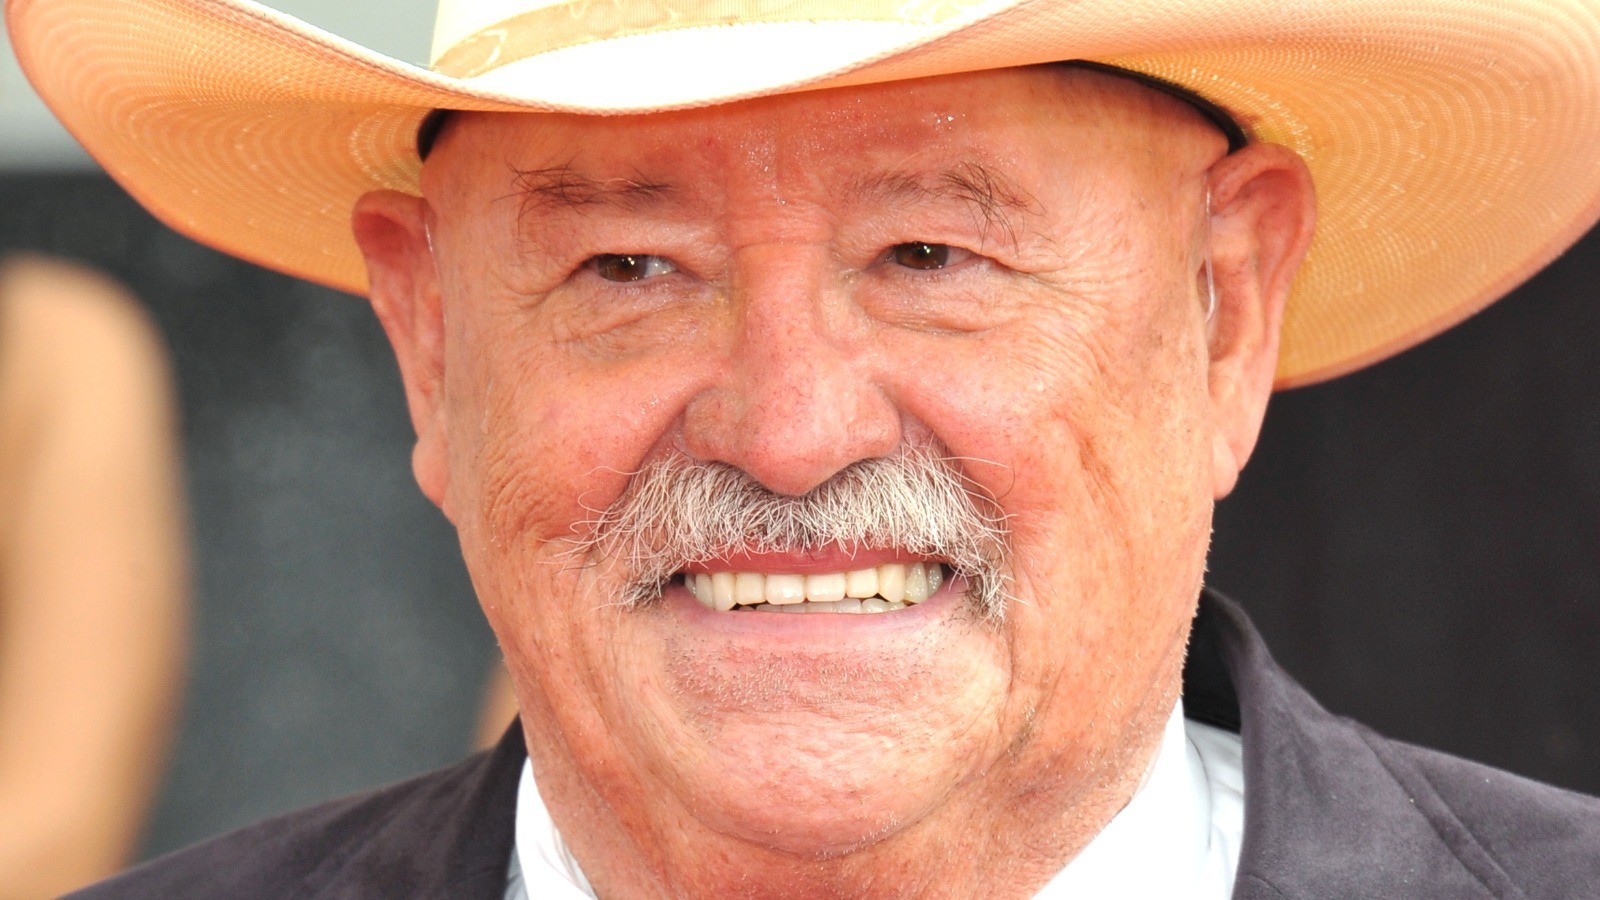 Yellowstone' Cowboy Buster Welch Dies